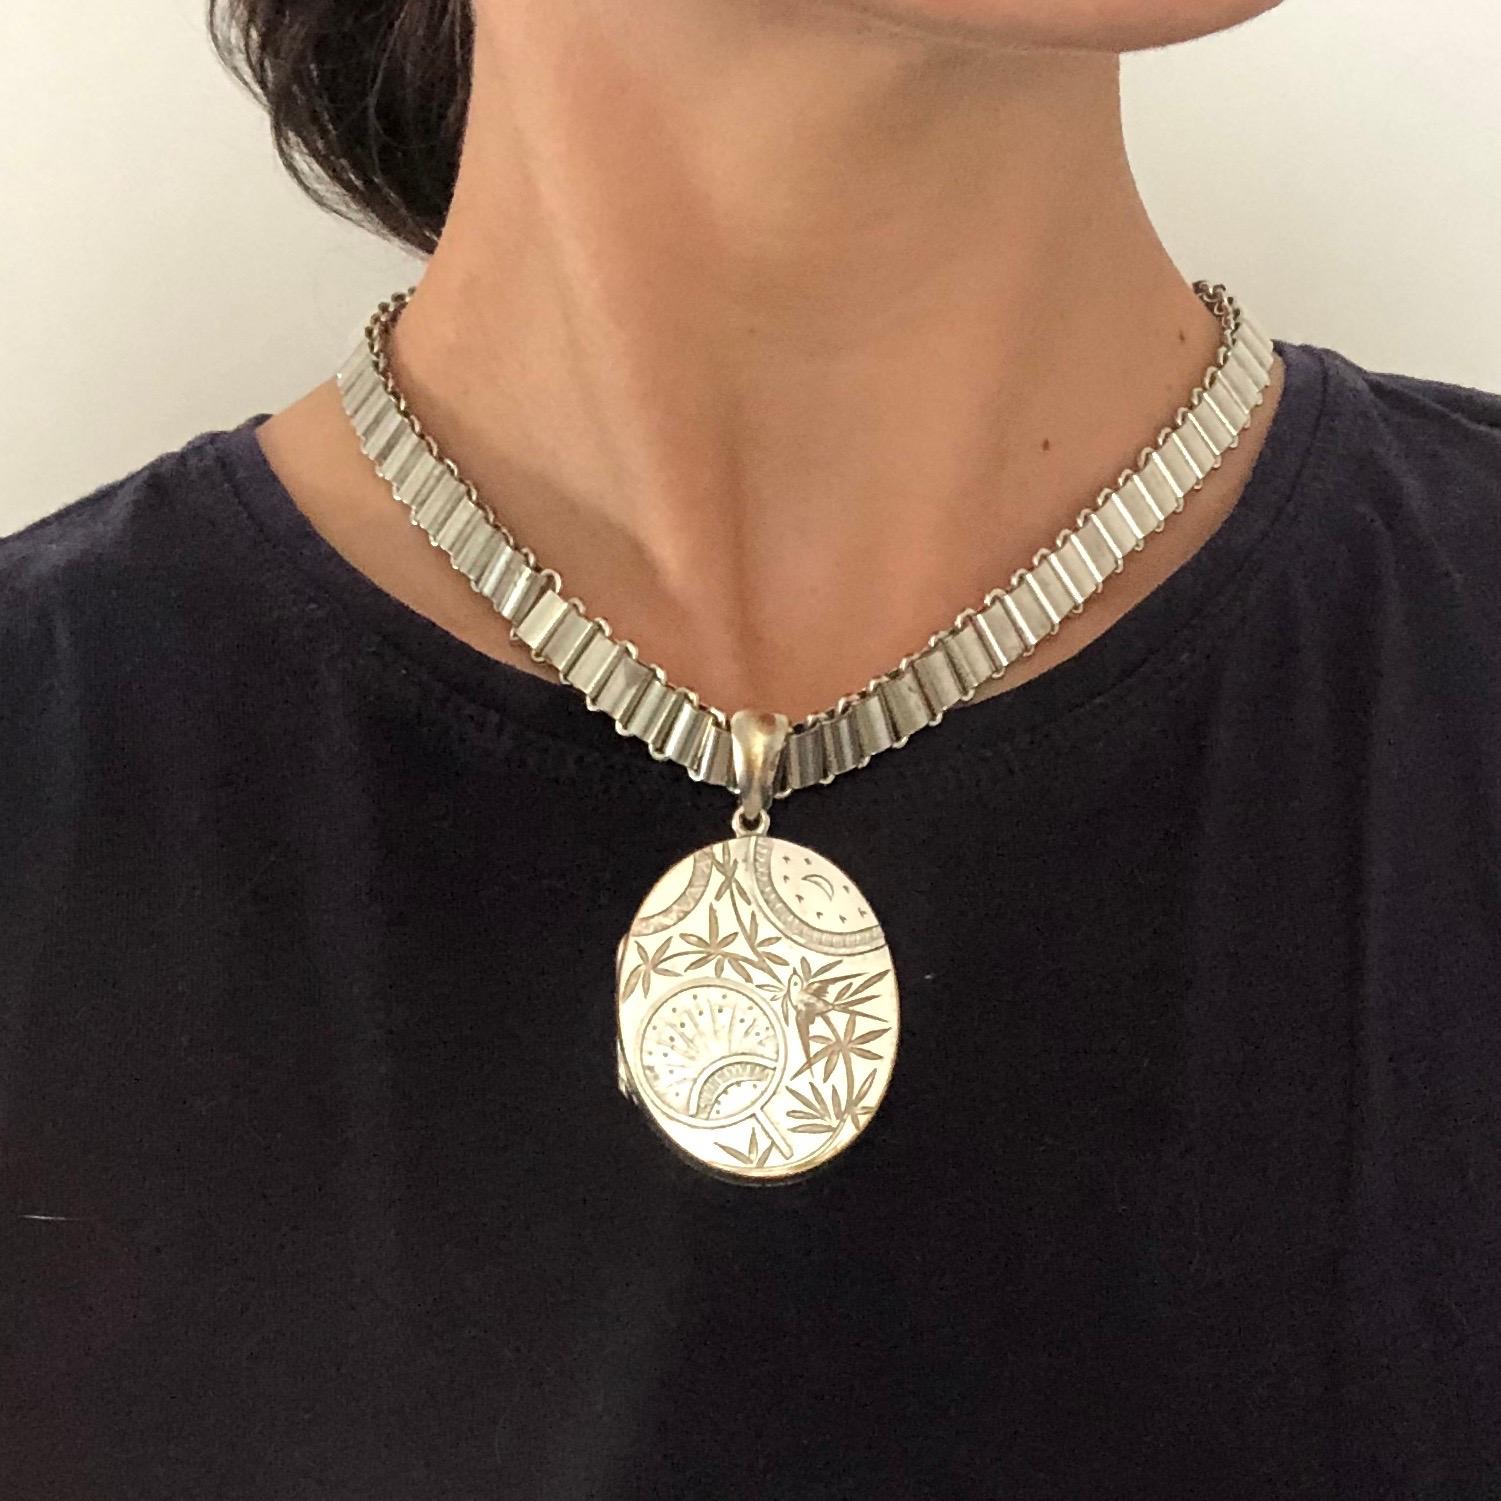 Women's Victorian Silver Plated Locket and Collar Chain Necklace